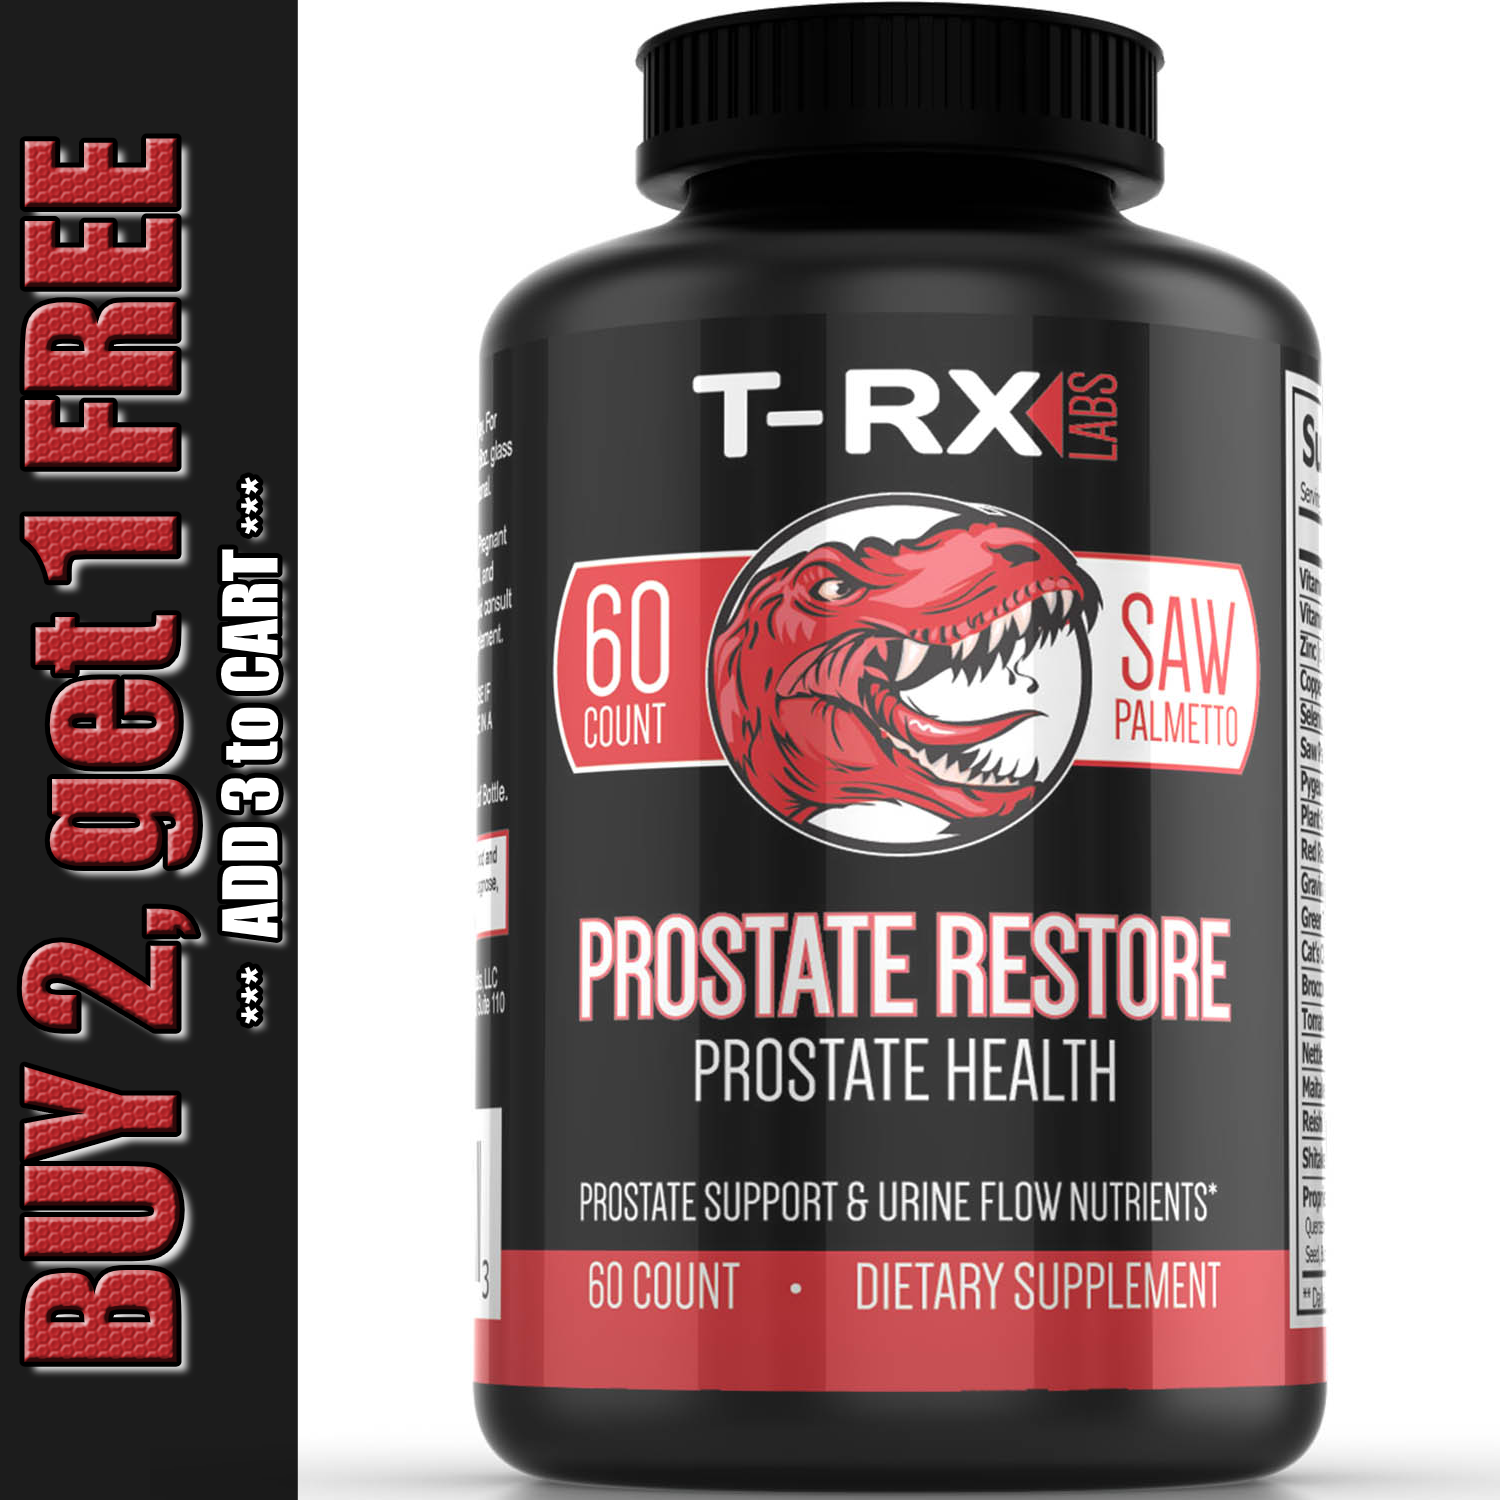 T-RX Ultra Pure Prostate Support Supplement w/ Saw Palmetto Prostate Health